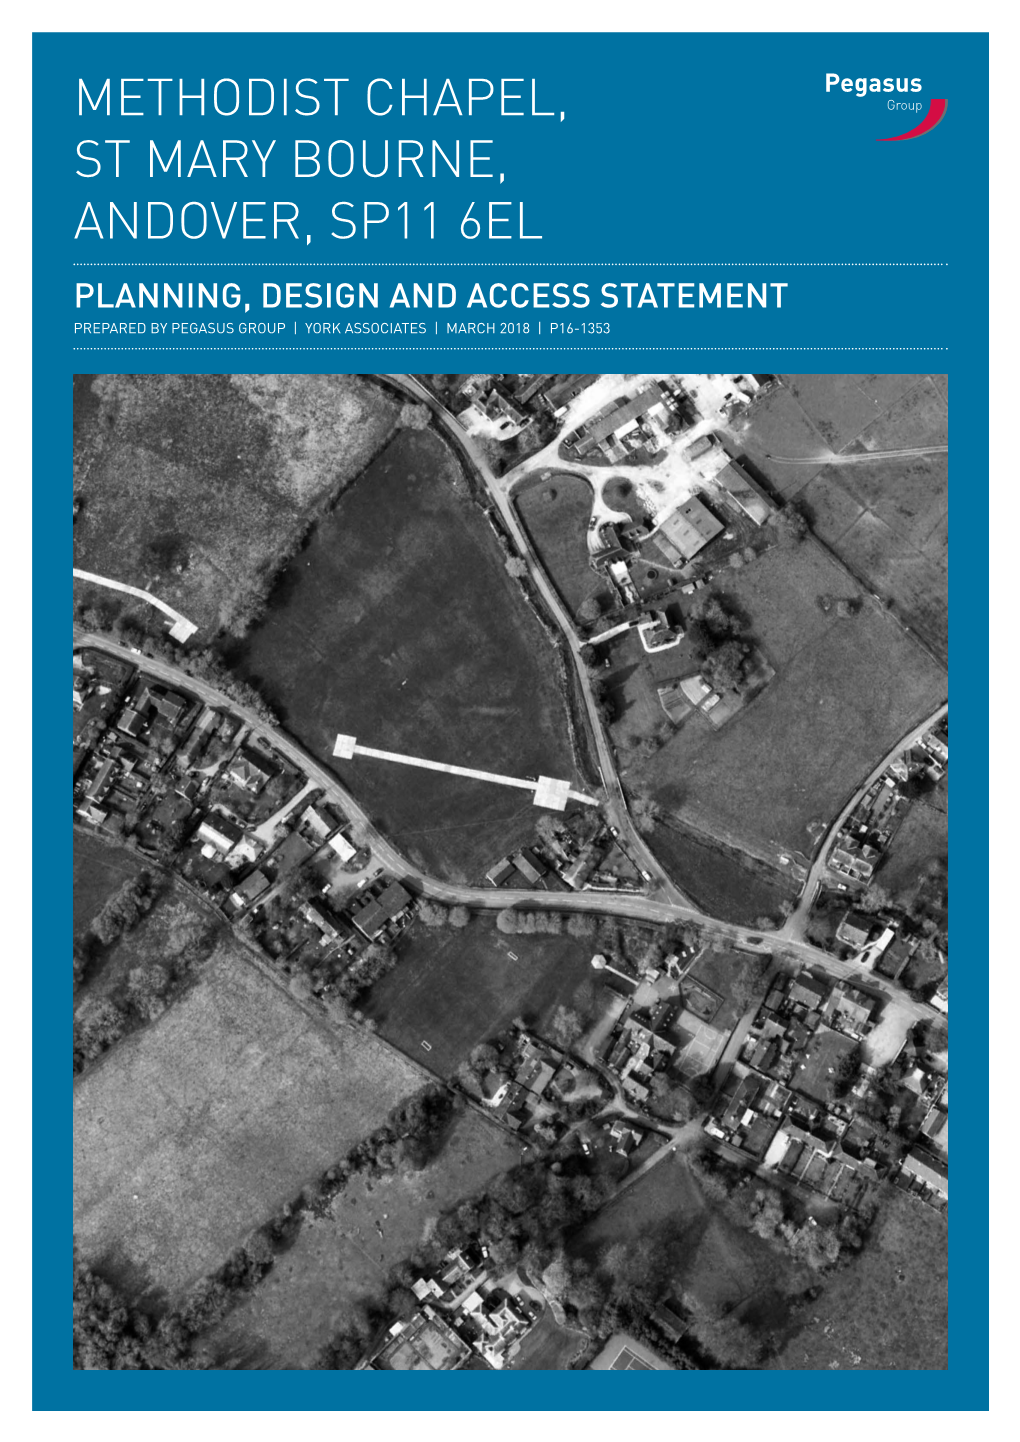 Methodist Chapel, St Mary Bourne, Andover, Sp11 6El Planning, Design and Access Statement Prepared by Pegasus Group | York Associates | March 2018 | P16-1353